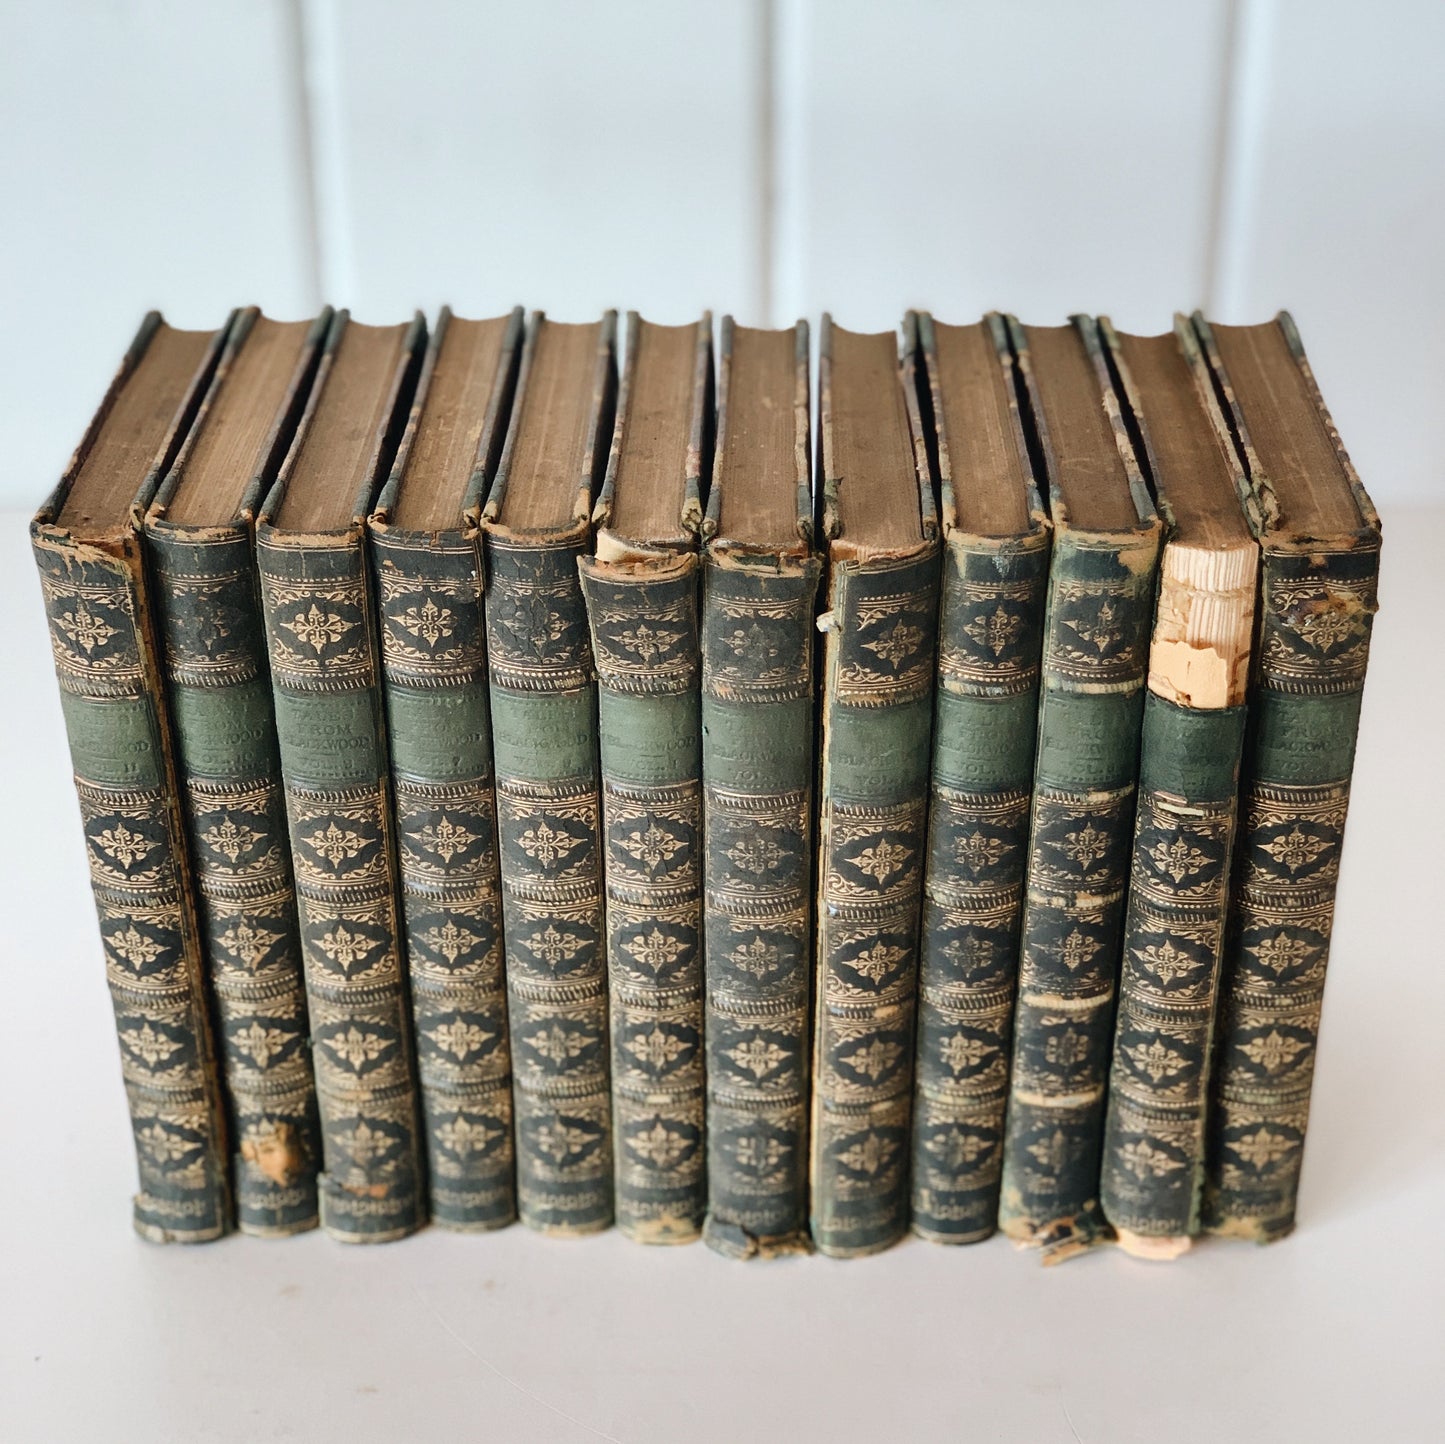 4-Volume Antique Shabby Leather-Bound, Tales From Blackwood, 1800s Book Bundle